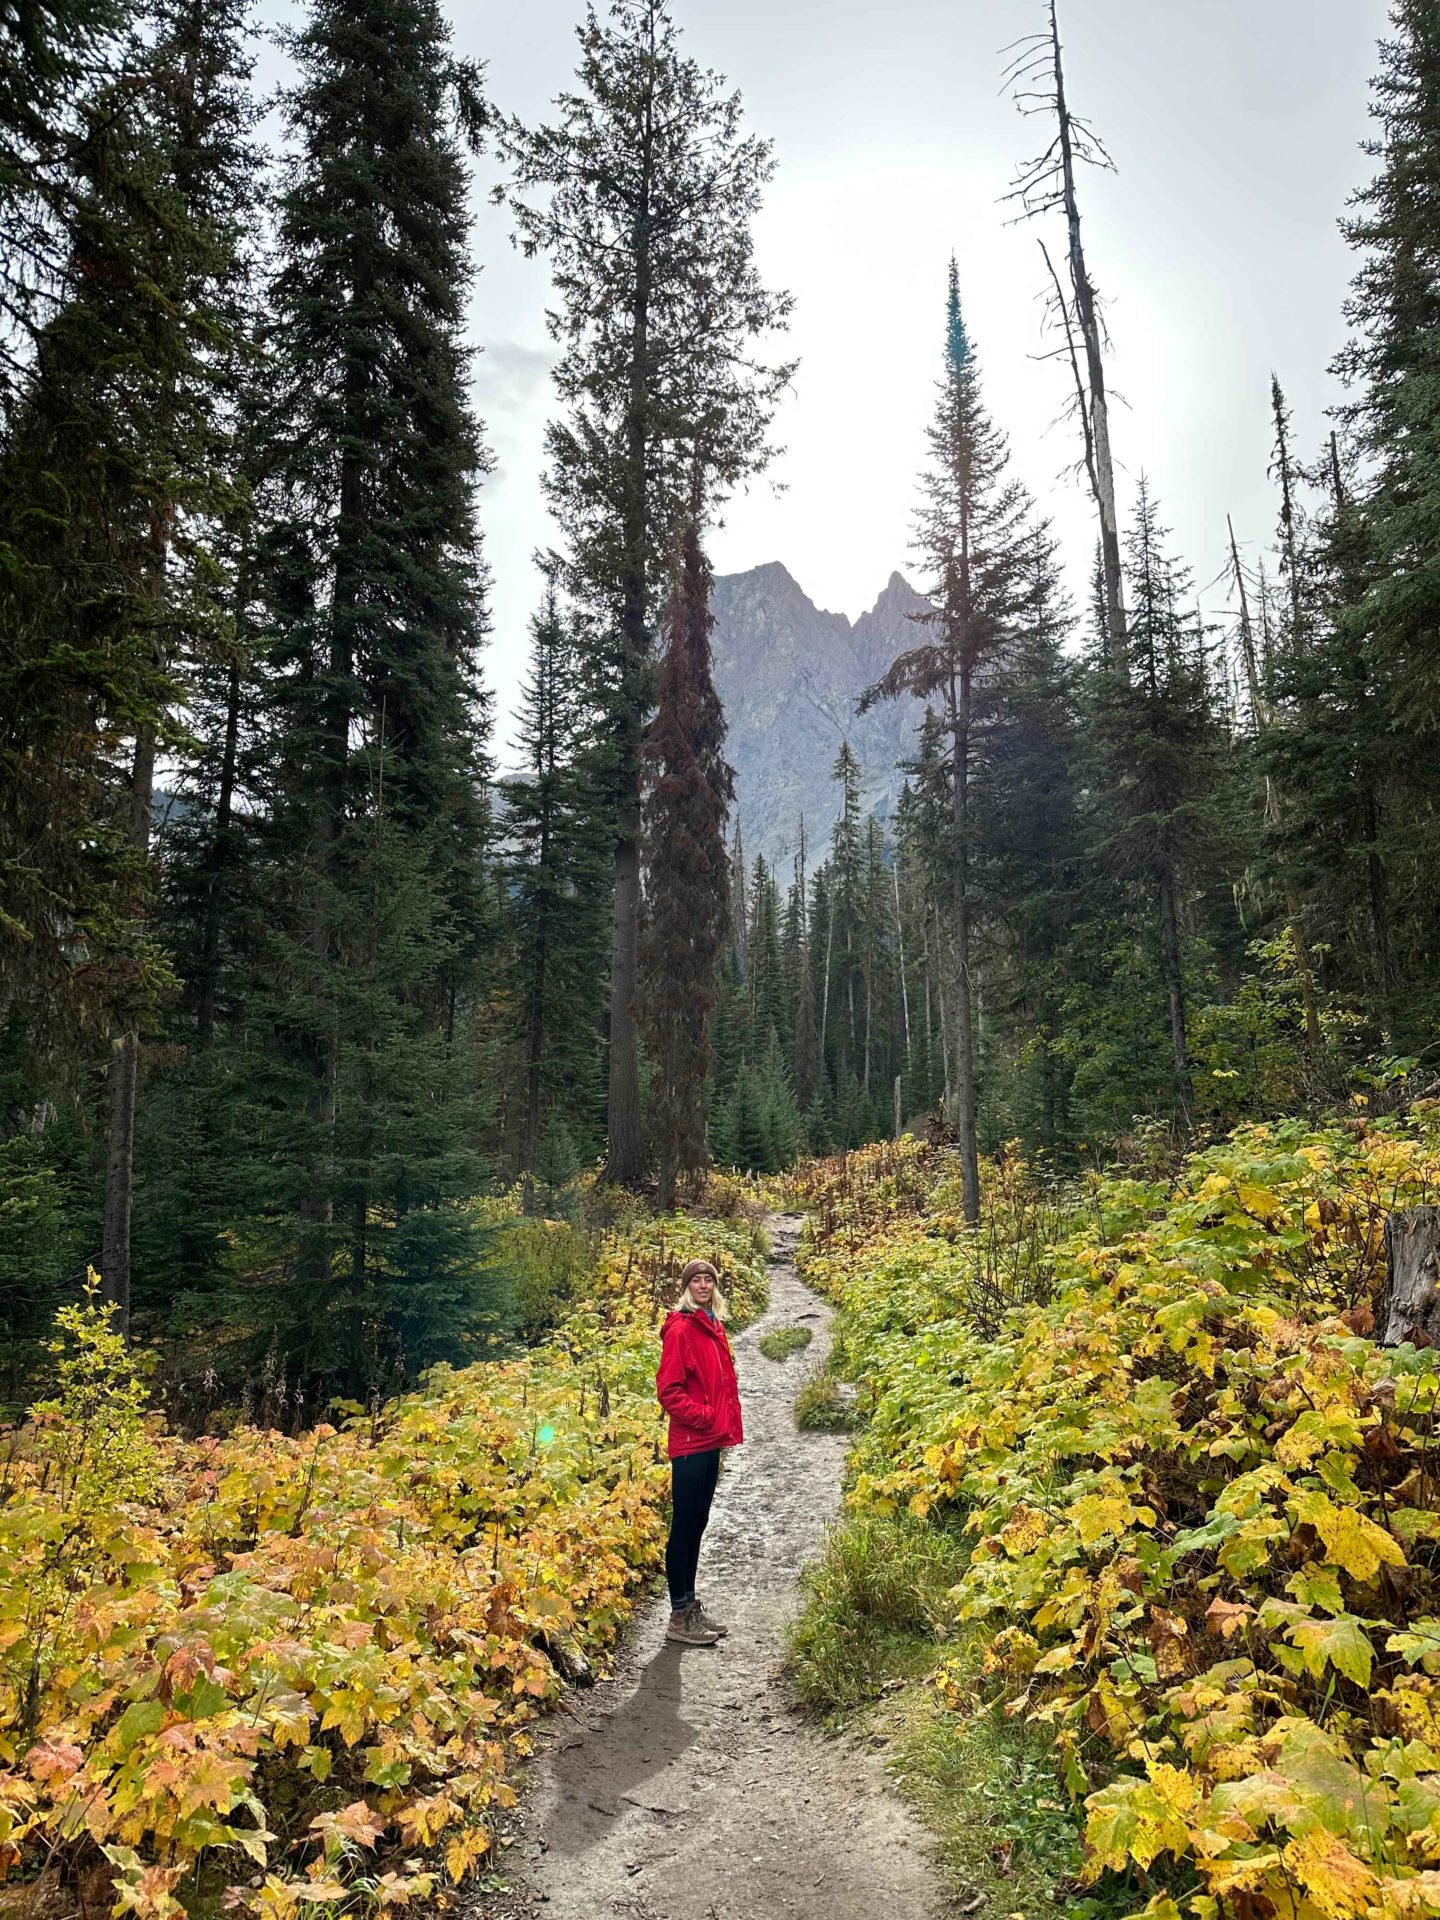 Zanna van Dijk walking through Yoho National Park surrounded by mountains and trees - Canada Road Trip Itinerary